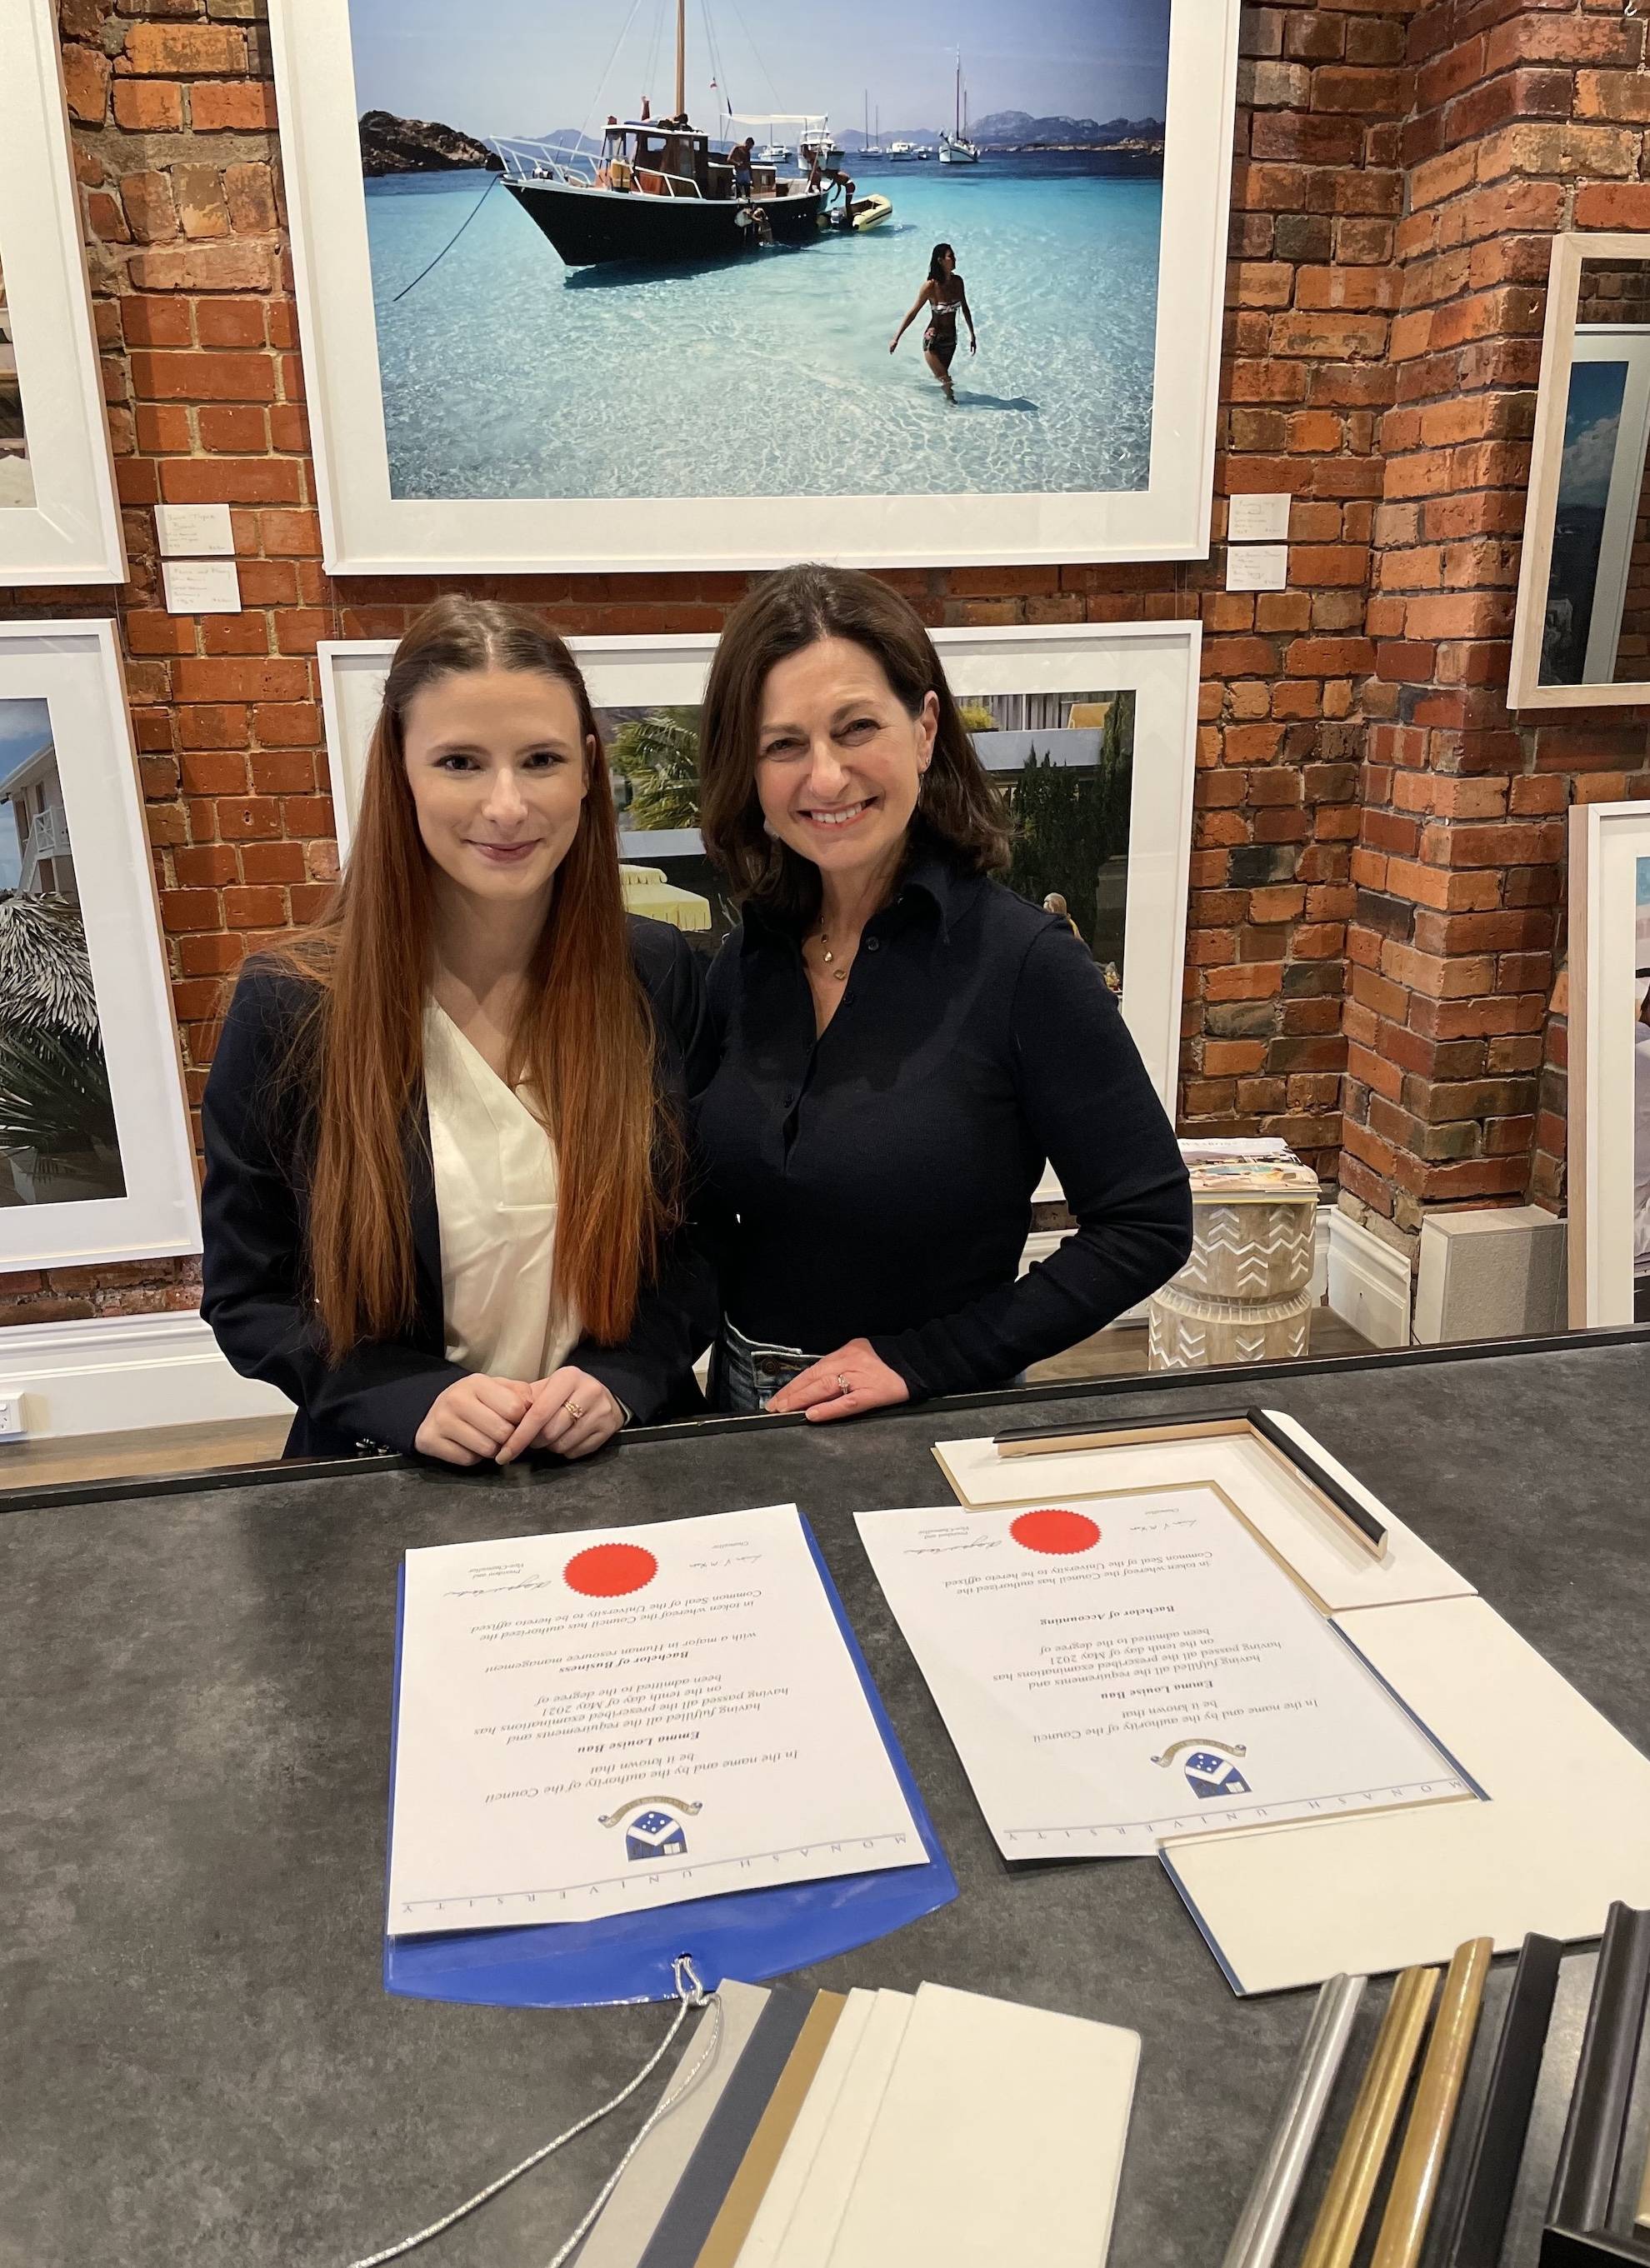 Cath and Emma standing at the counter with a selection of frame options and Emma's degrees, ready for framing